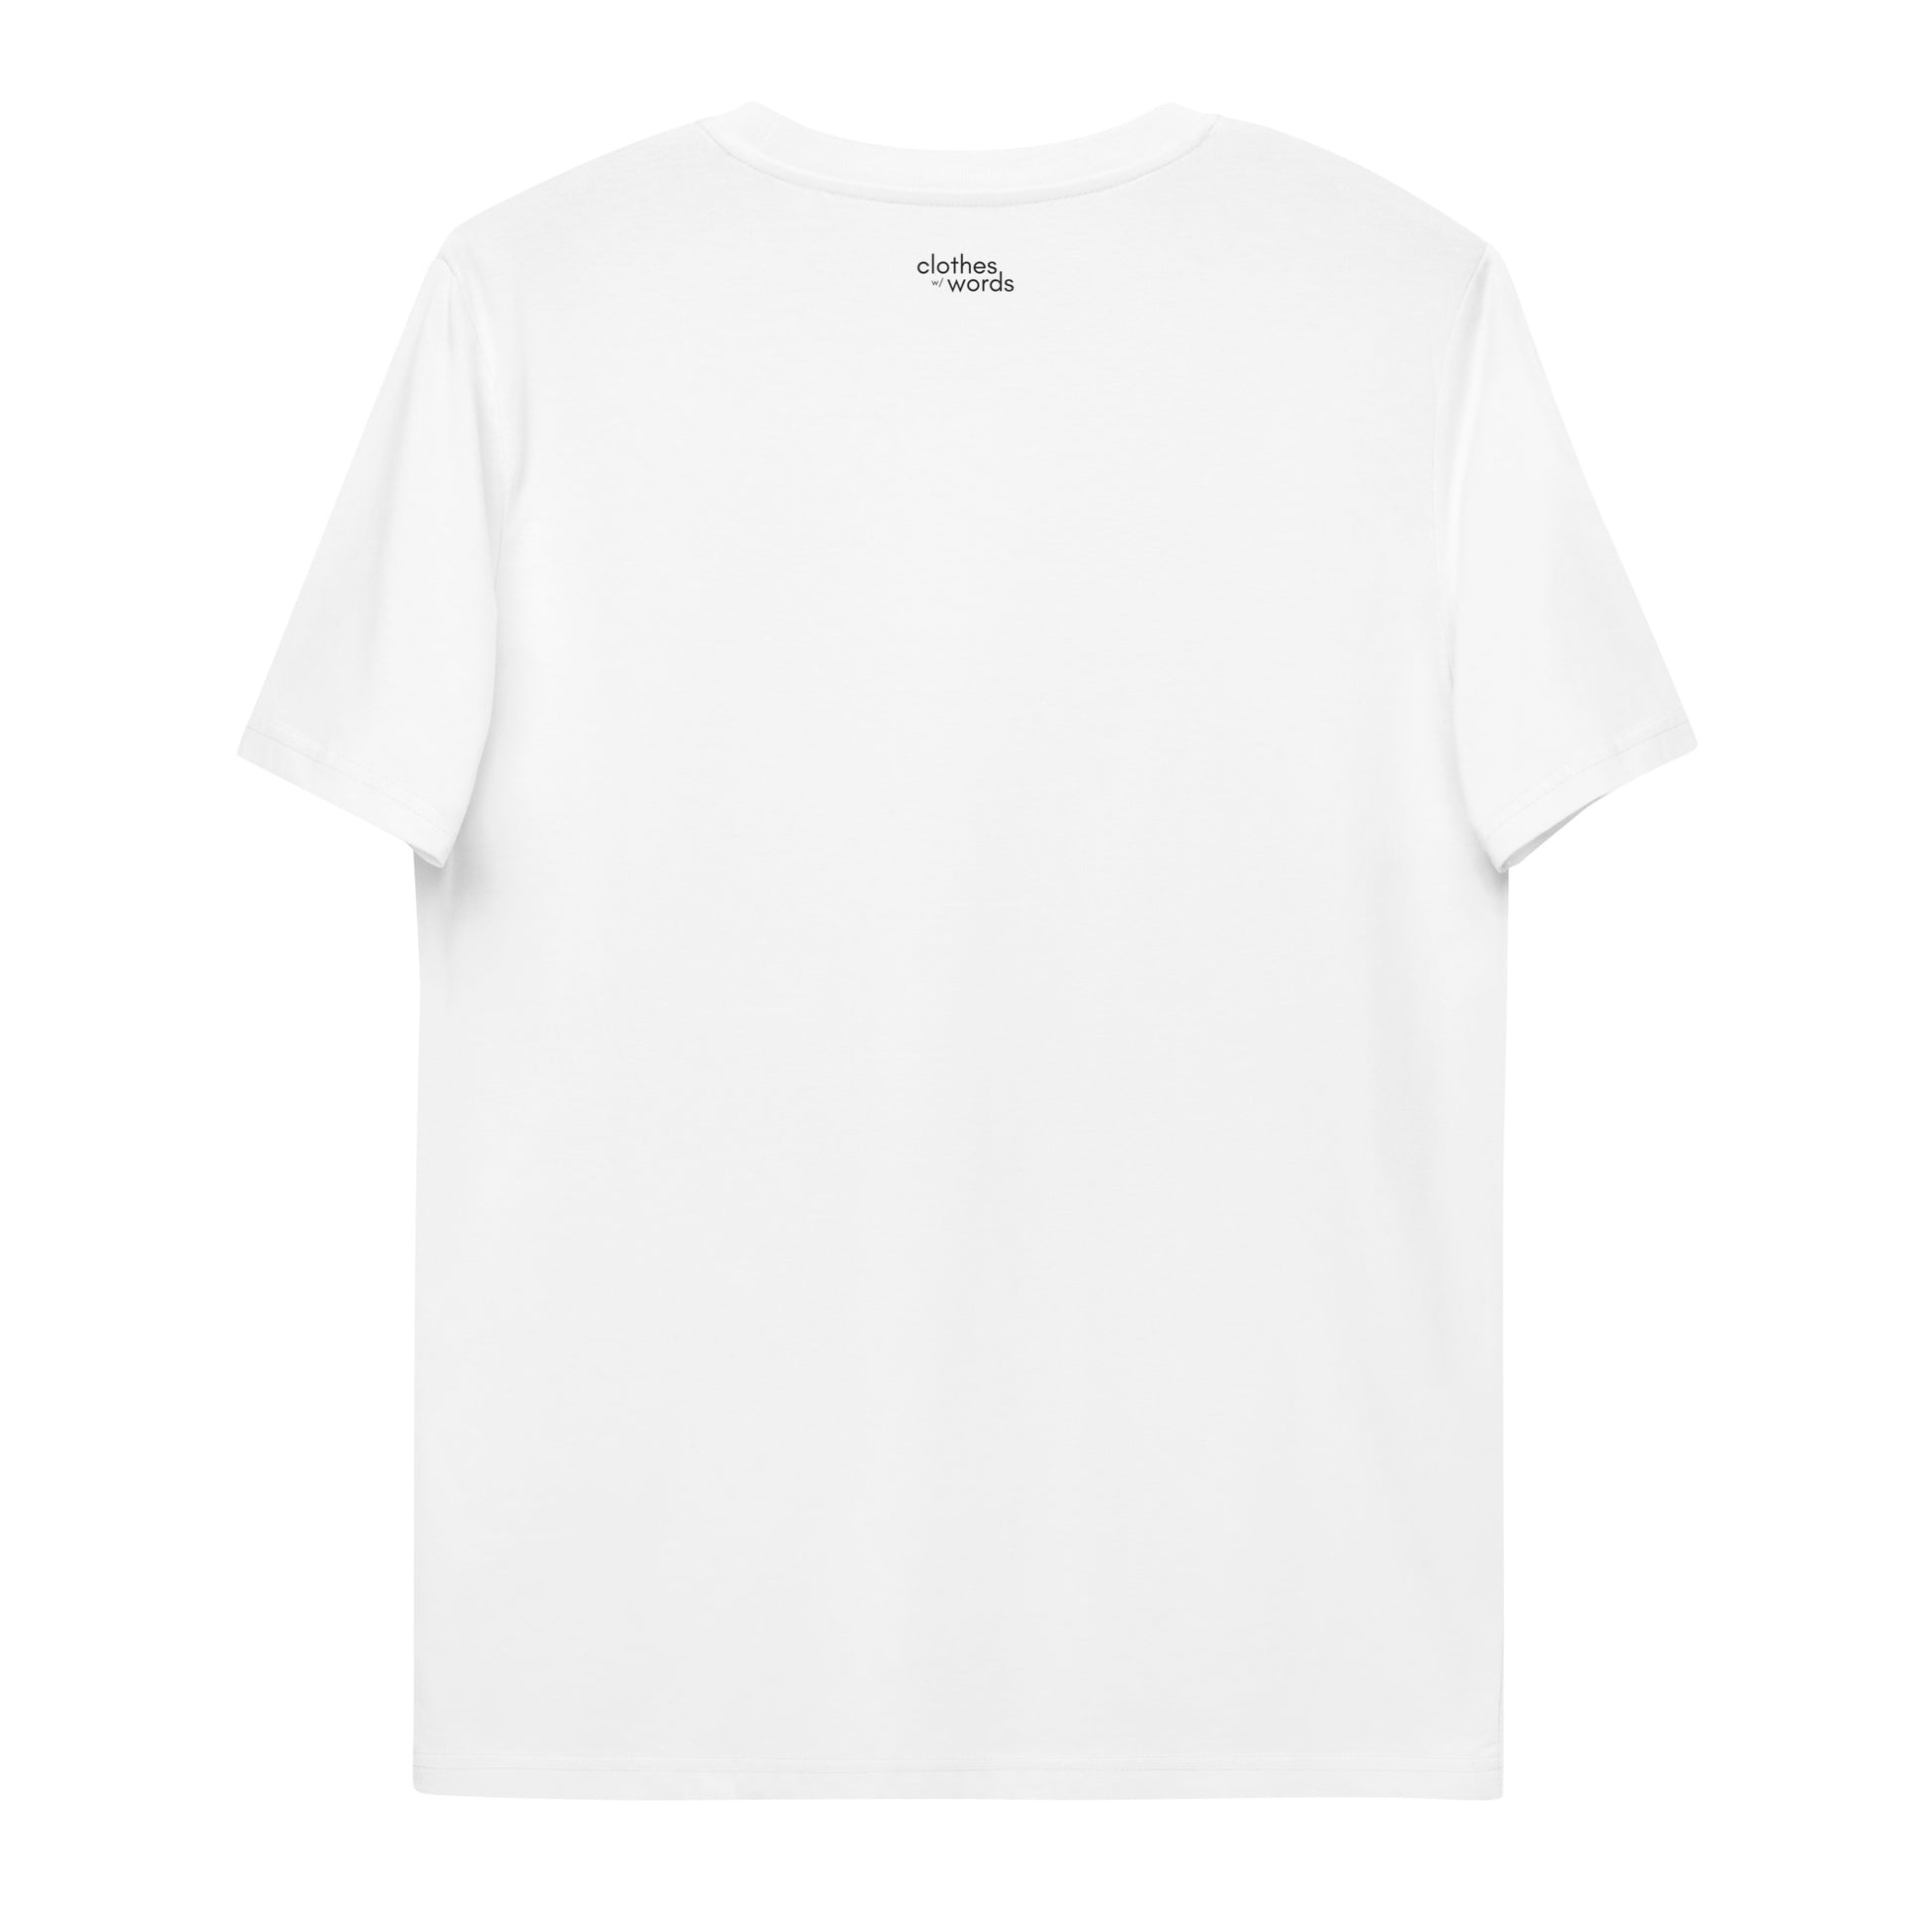 No Ego Club t-shirt white and unisex. Clothes With Words apparel.